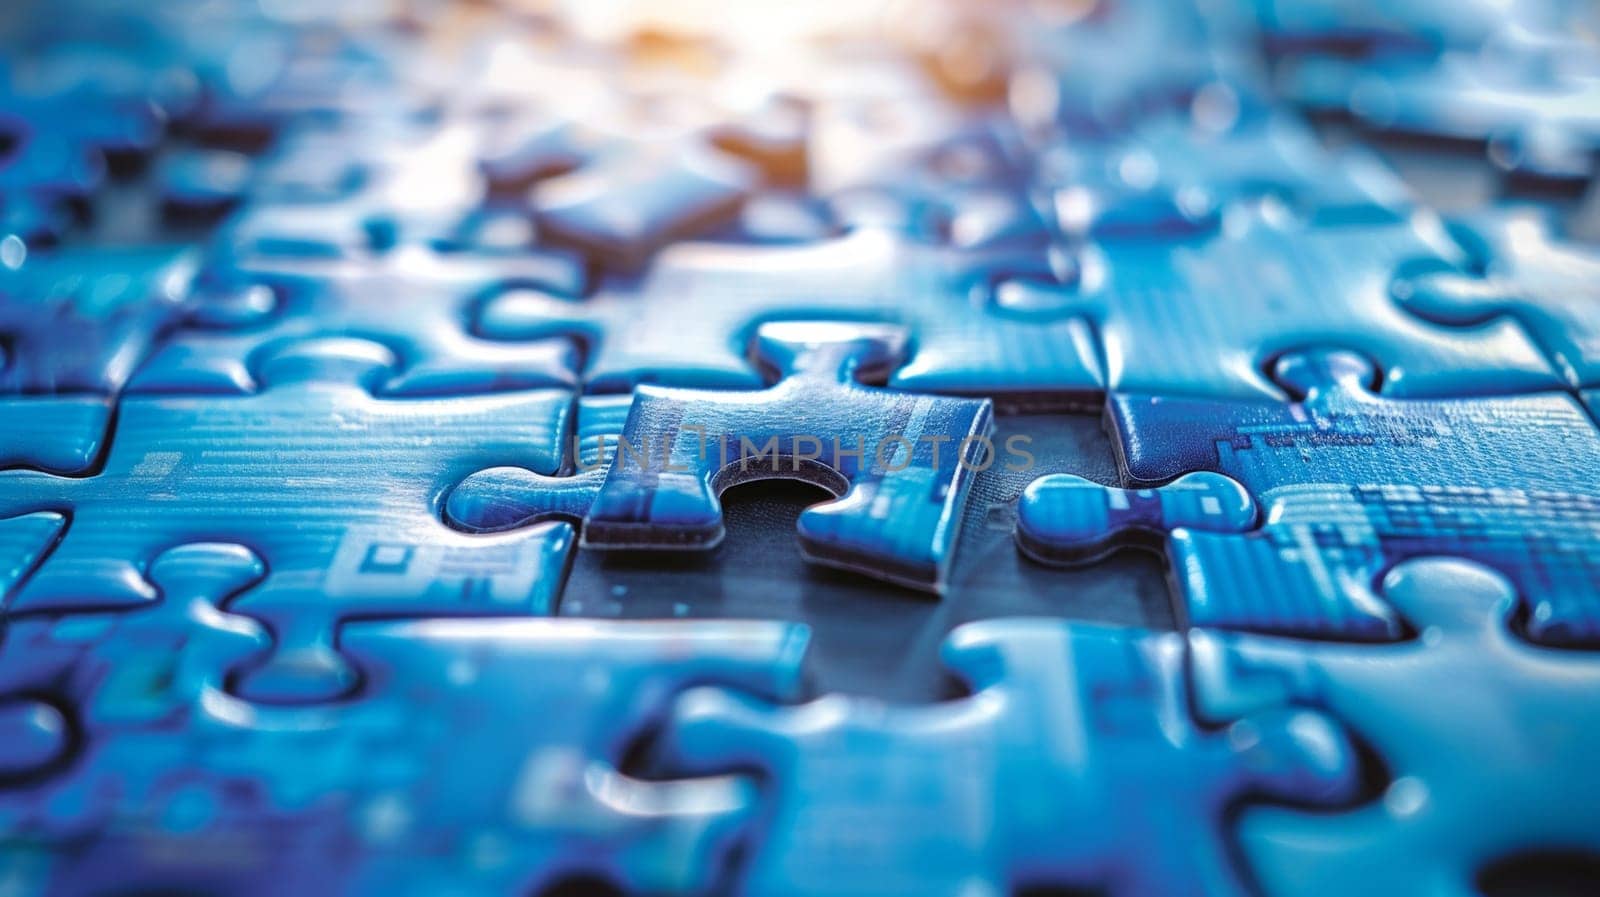 A detailed close-up of a single blue puzzle piece, showcasing intricate details and textures by but_photo